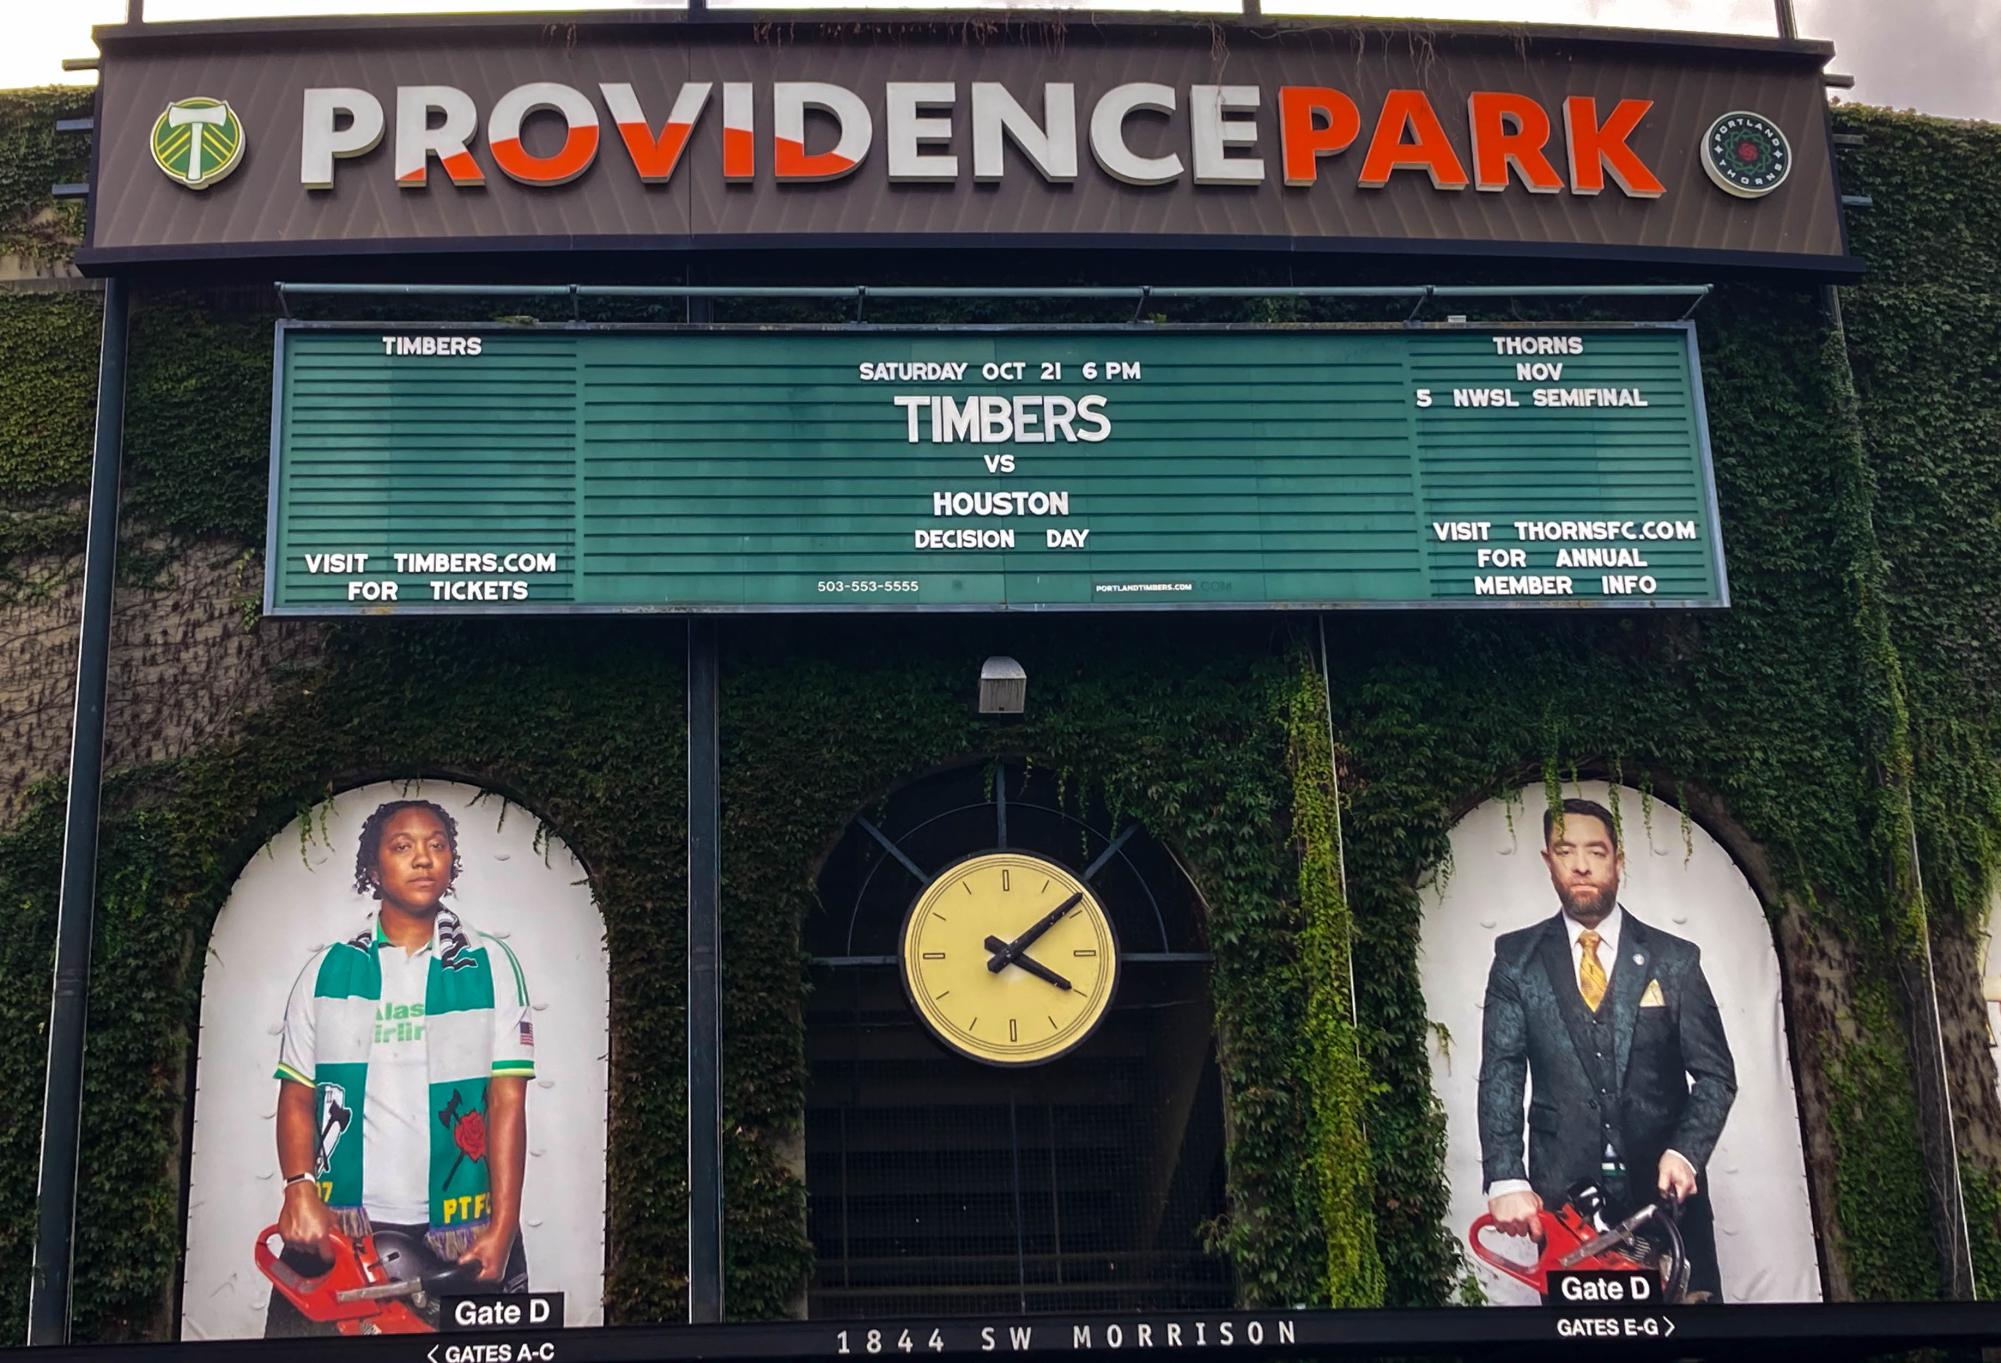 Providence Park is home of both the Timbers and Thorns, and employs many Lincoln students.